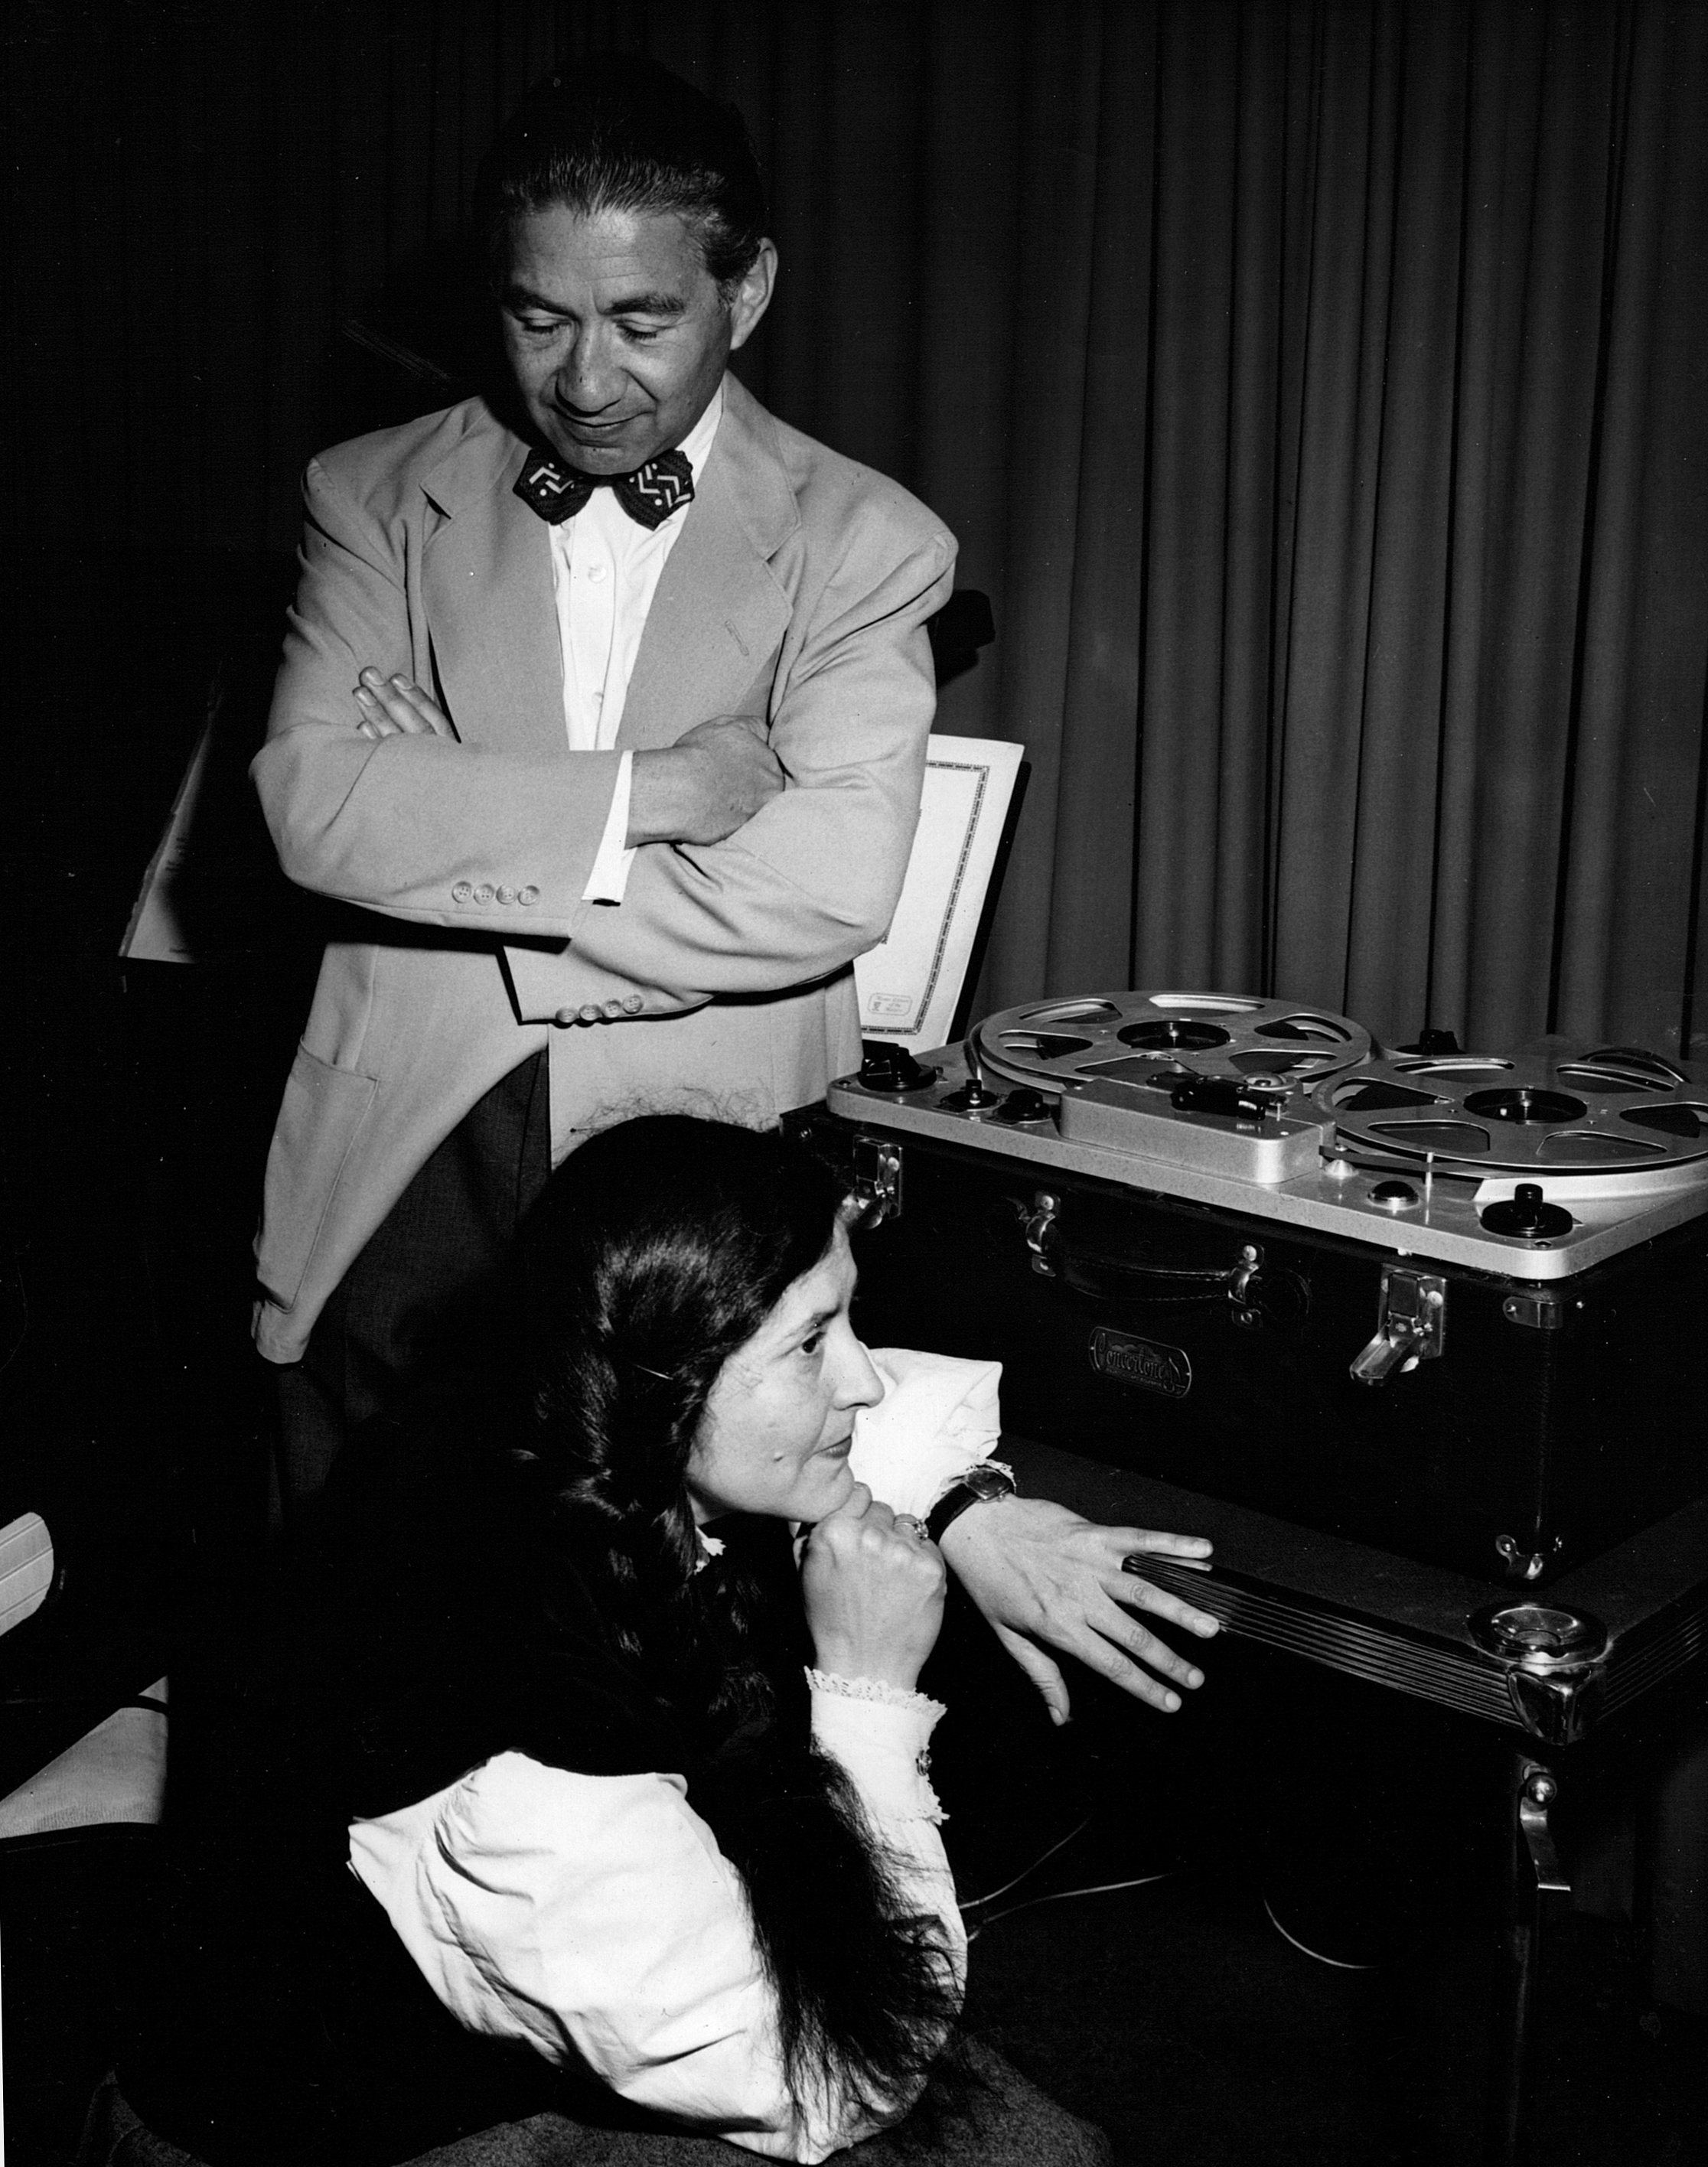 Henri Temianka and Lili Krauss audition a recording of their Beethoven sonata performance, ca. 1947.